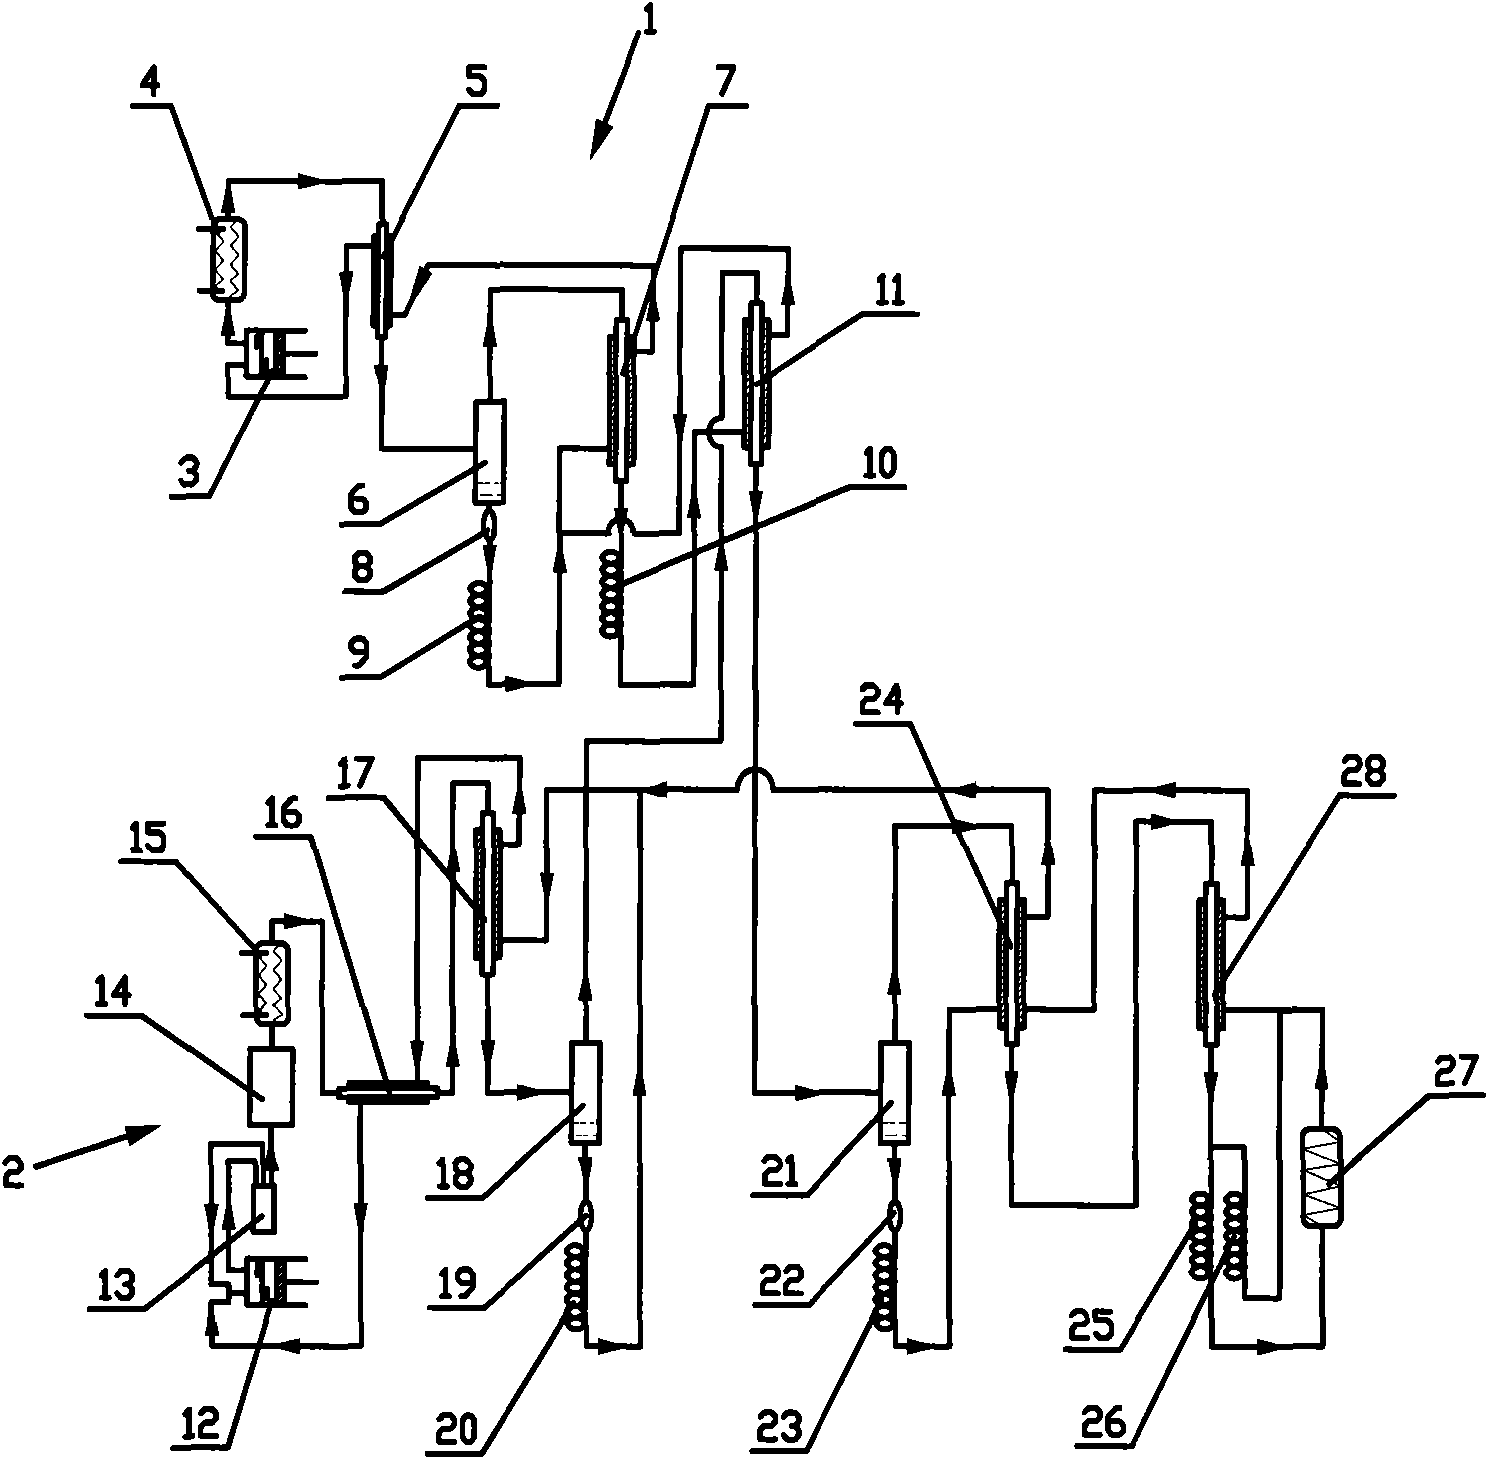 Self-overlapping refrigeration system